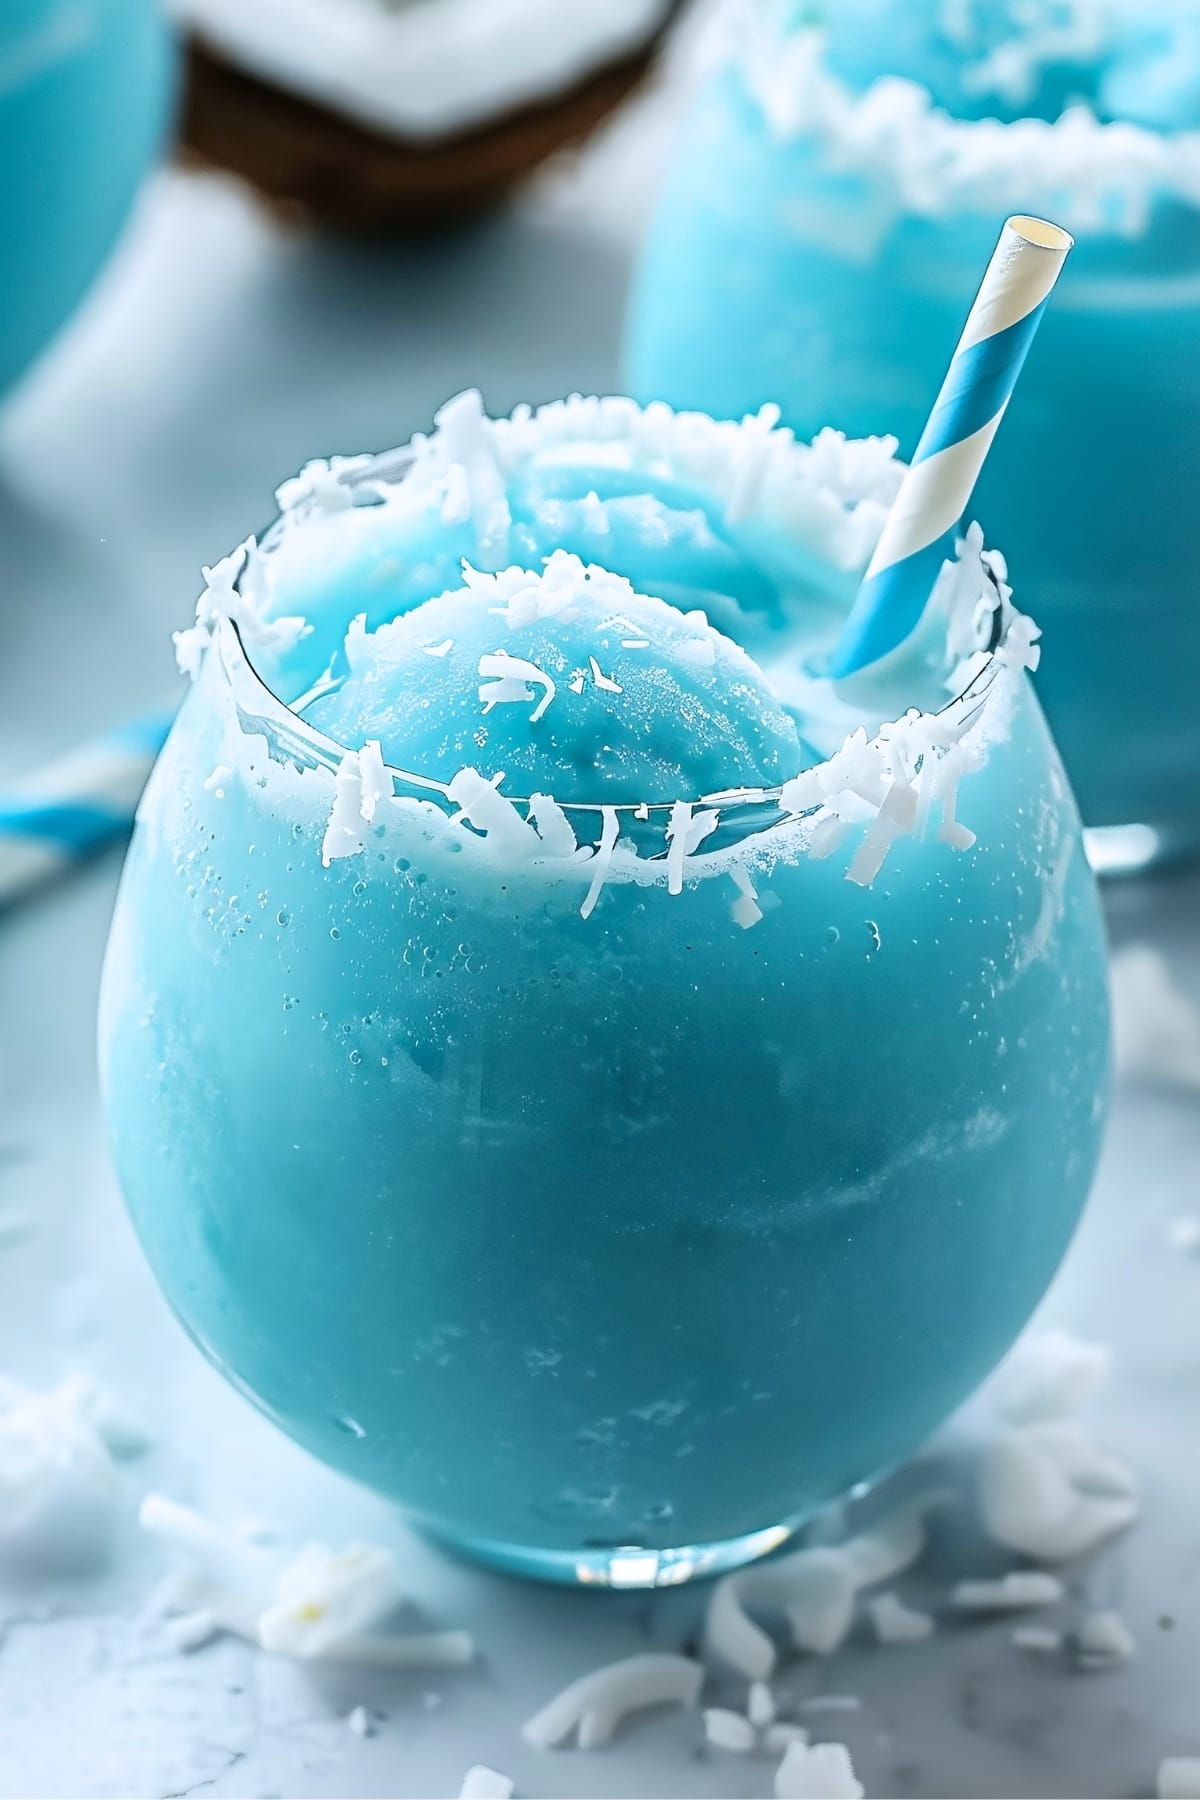 Homemade Jack Frost cocktail with a blend of pineapple, rum and coconut